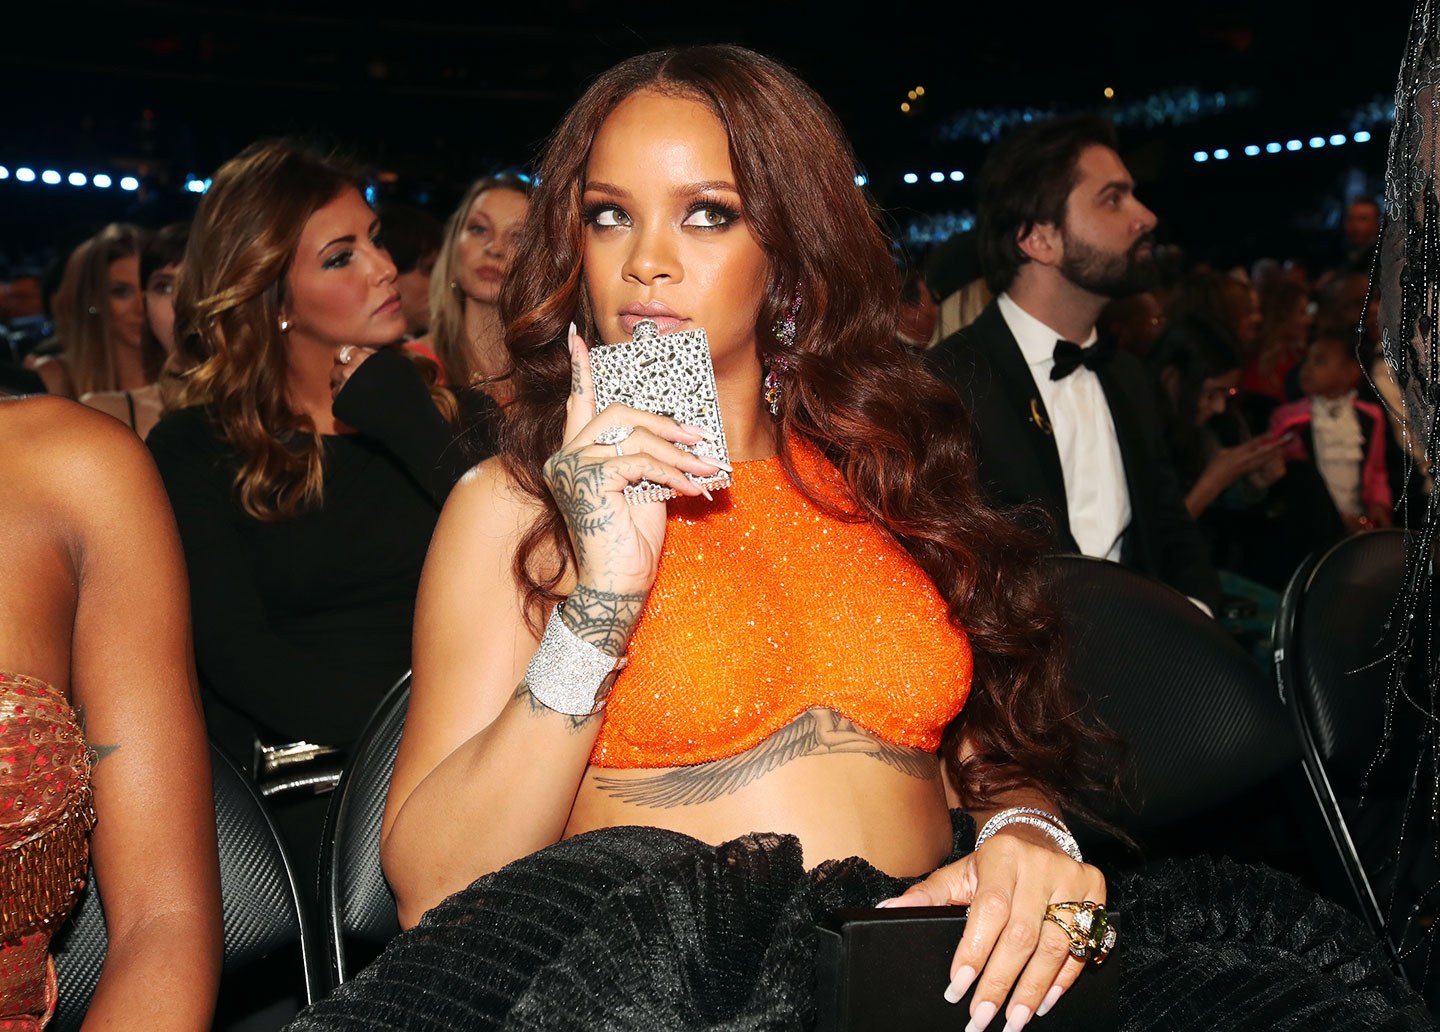 An Apology to Rihanna on Behalf of the Grammys